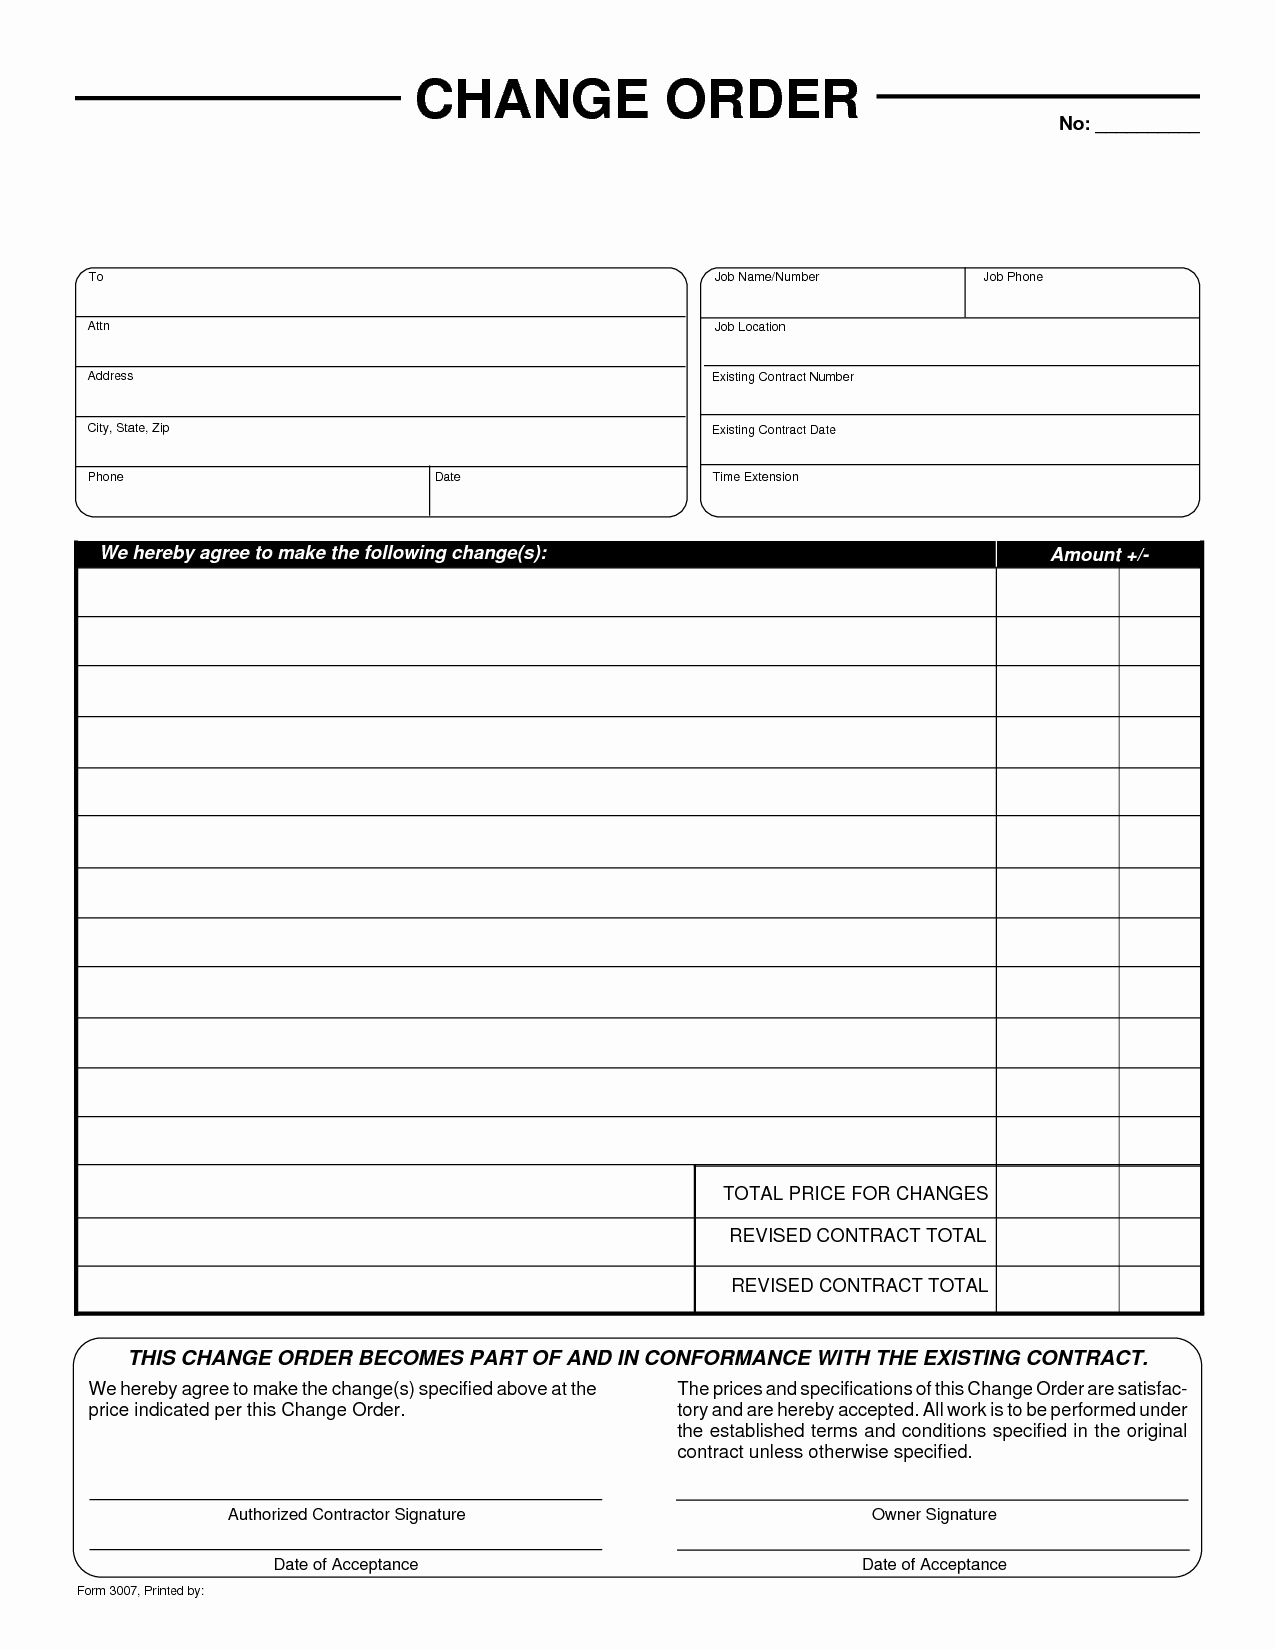 Product order form Template Unique Change Of order form by Liferetreat Change order form